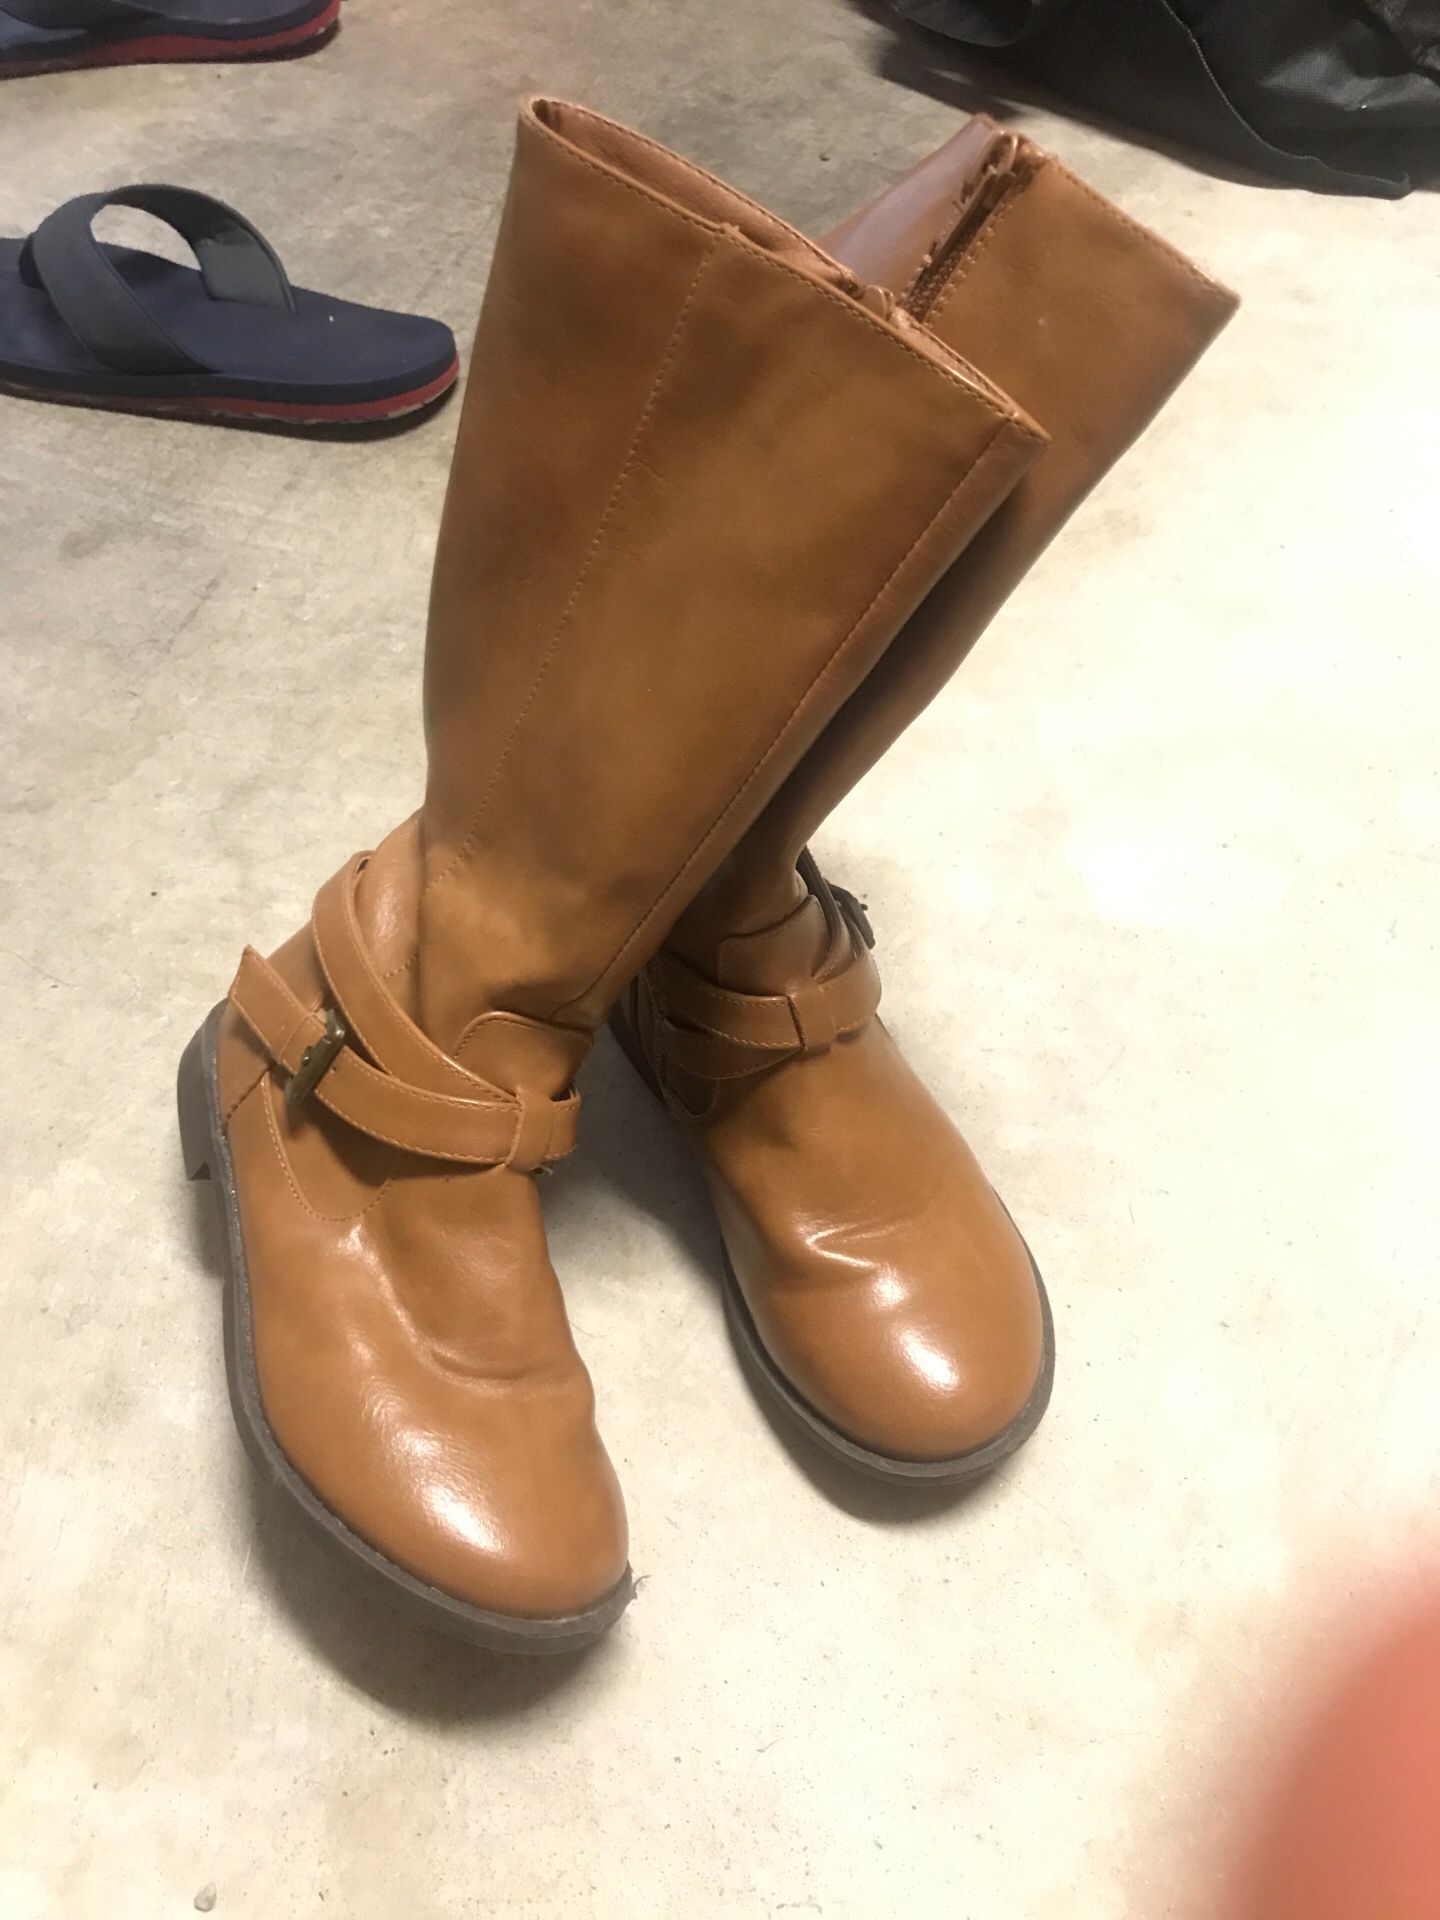 Girls boots size 1 $10